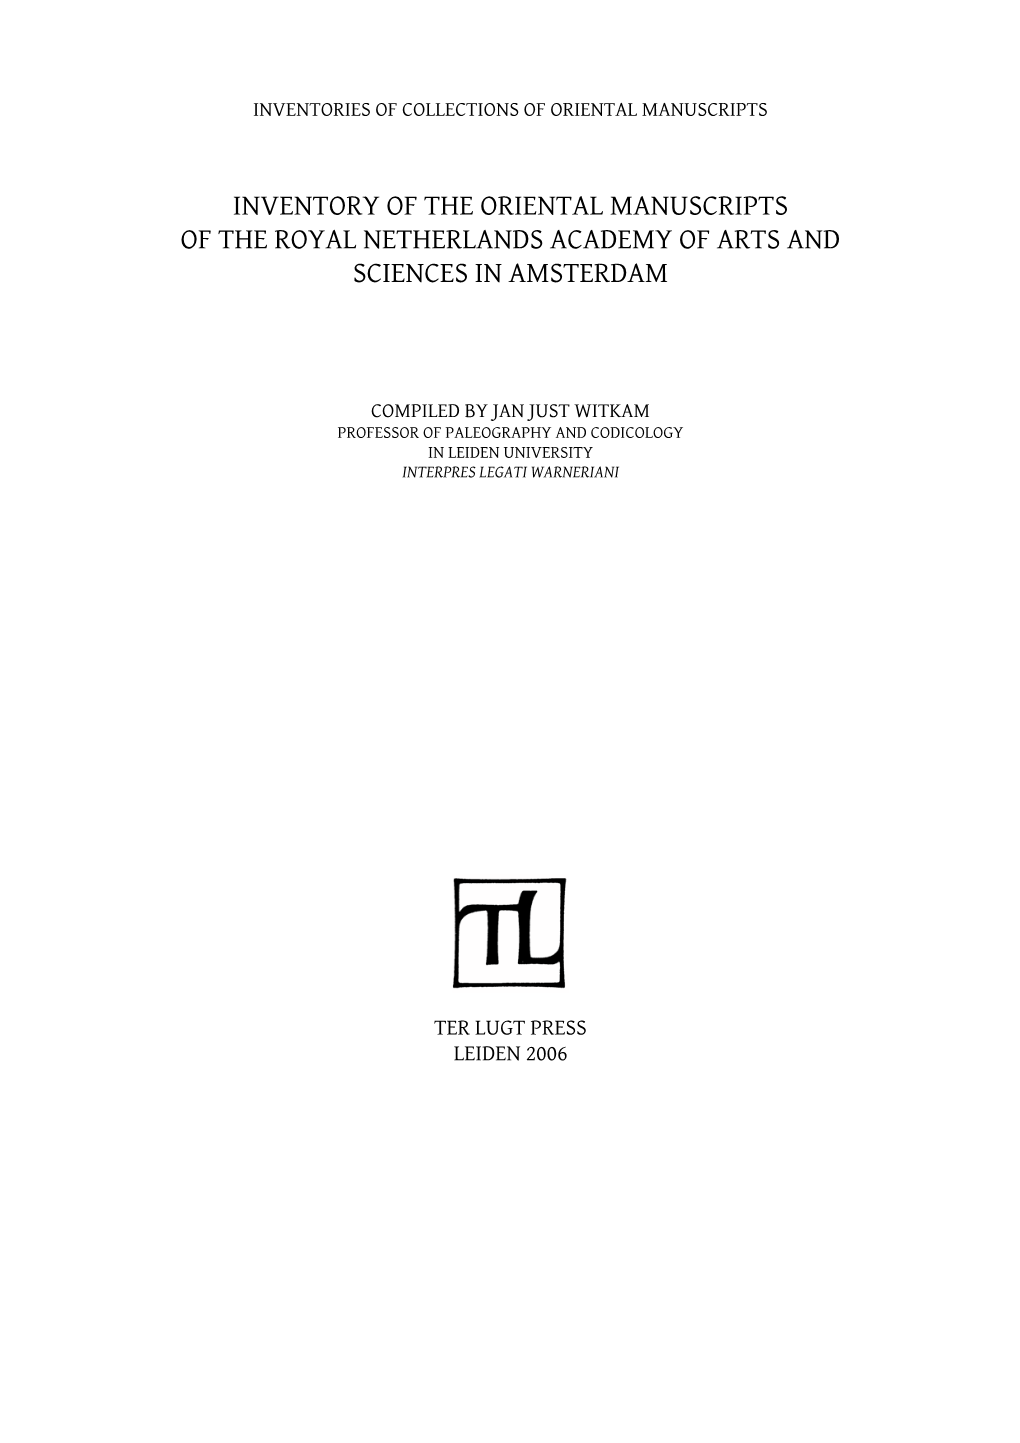 Inventory of the Oriental Manuscripts of the Royal Netherlands Academy of Arts and Sciences in Amsterdam